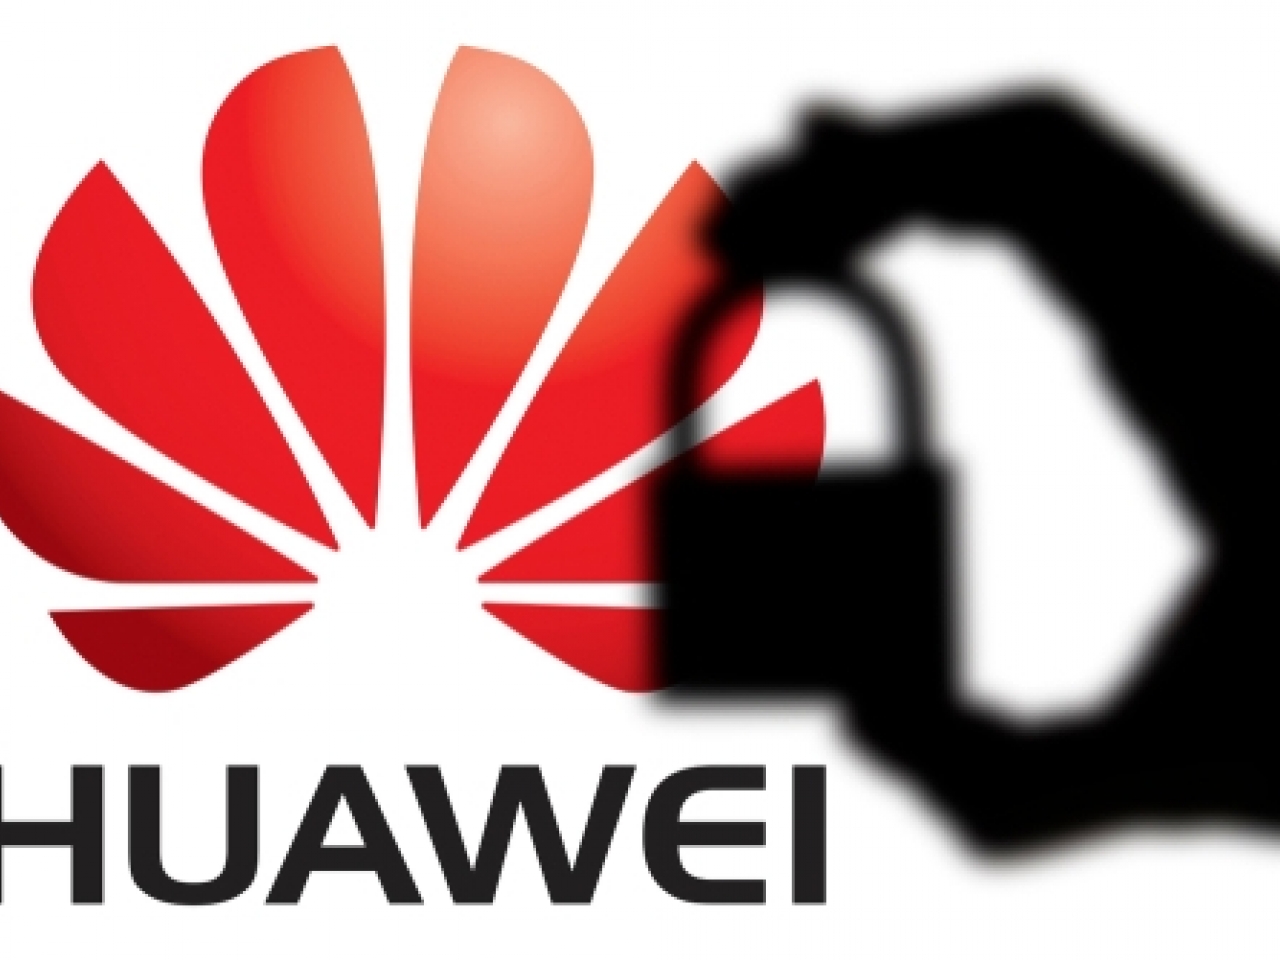 UK bans Huawei from its 5G network amid rising tensions